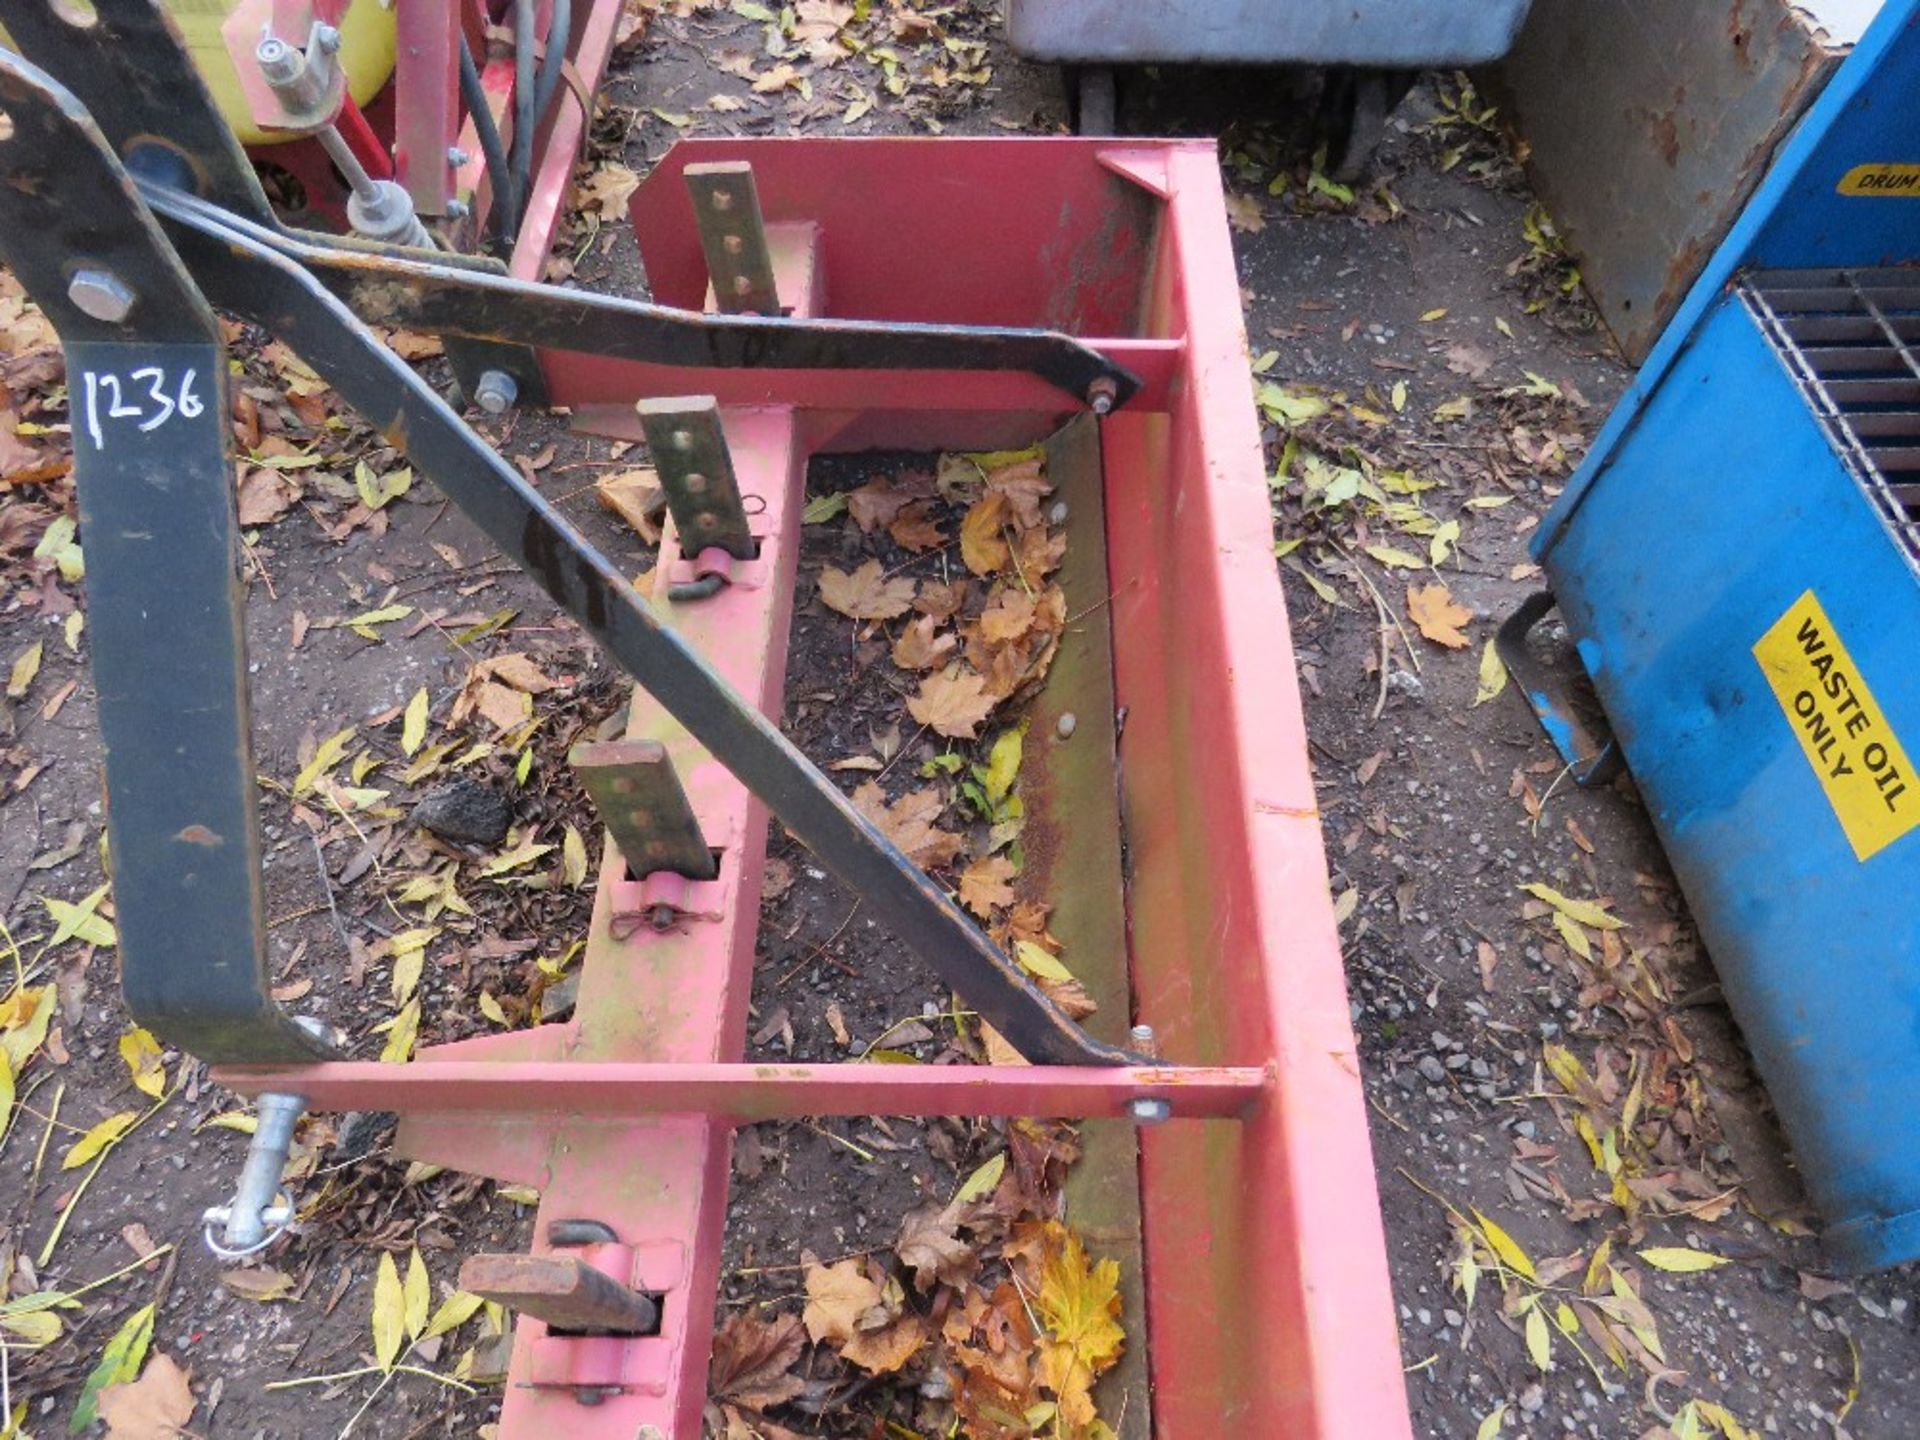 BOX GRADER 4FT WIDE APPOROX FOR COMPACT TRACTOR 3 POINT LINKAGE. - Image 3 of 3